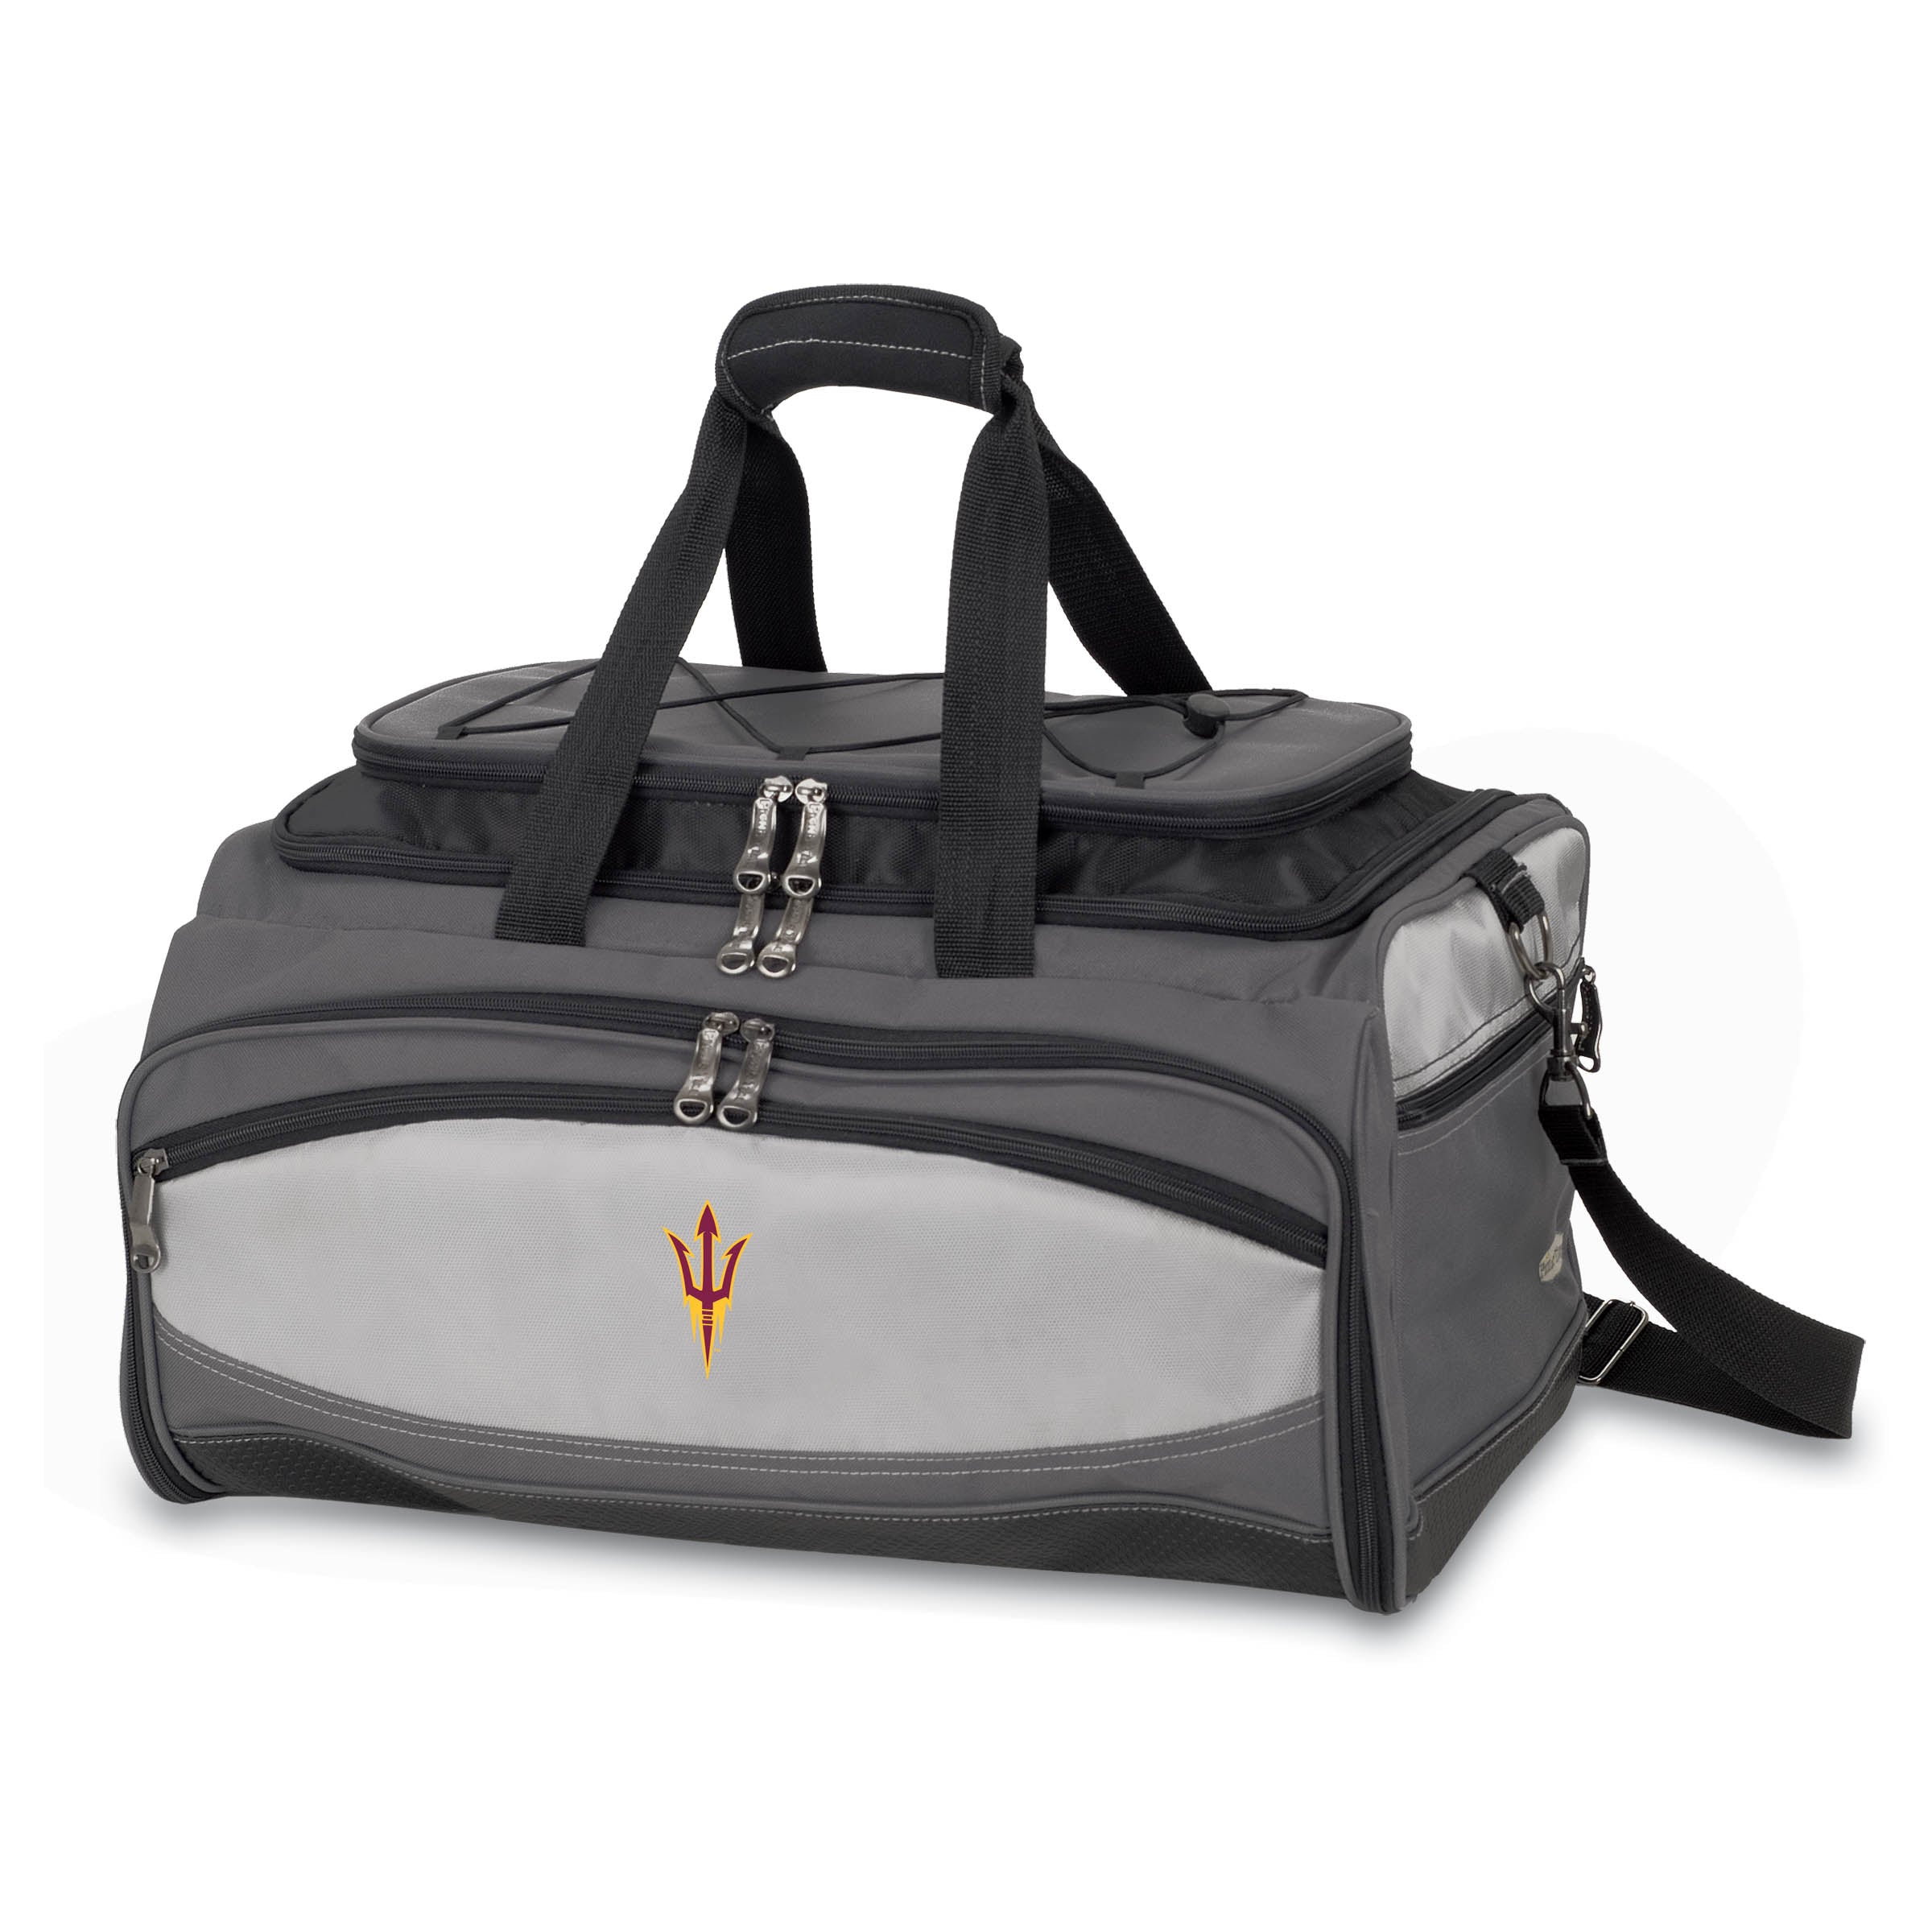 Arizona State Sun Devils - Buccaneer Portable Charcoal Grill & Cooler Tote